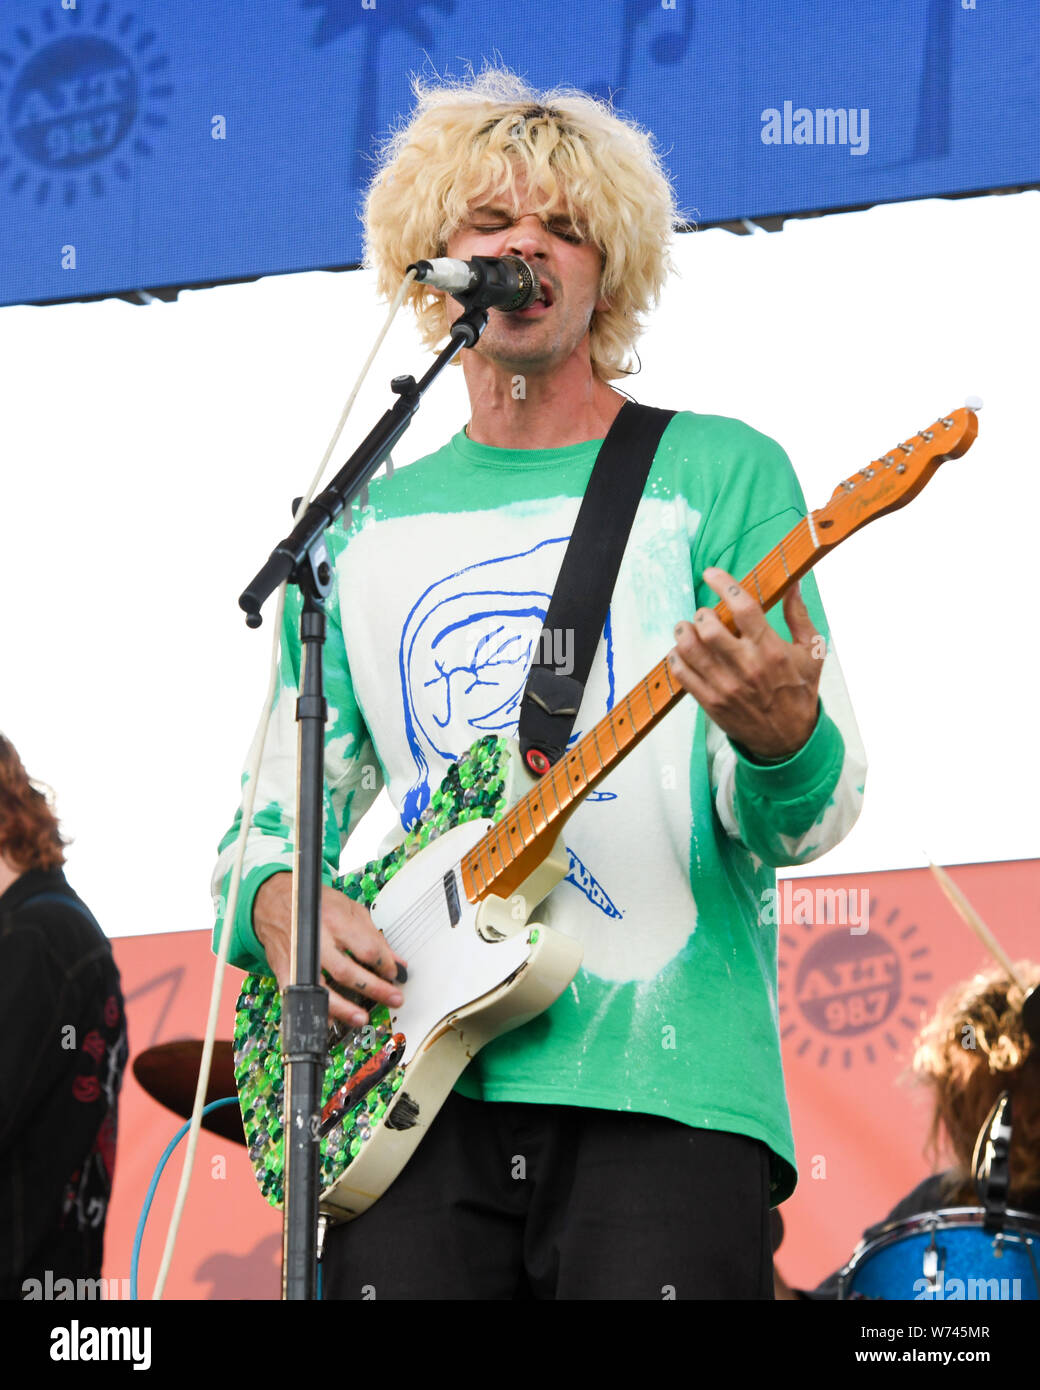 Long Beach, California, USA. 3rd Aug 2019. Christian Zucconi of the band Grouplove performs at ALT 98.7 Summer Camp at the Queen Mary in Long Beach on August 3, 2019. Credit: The Photo Access/Alamy Live News Stock Photo